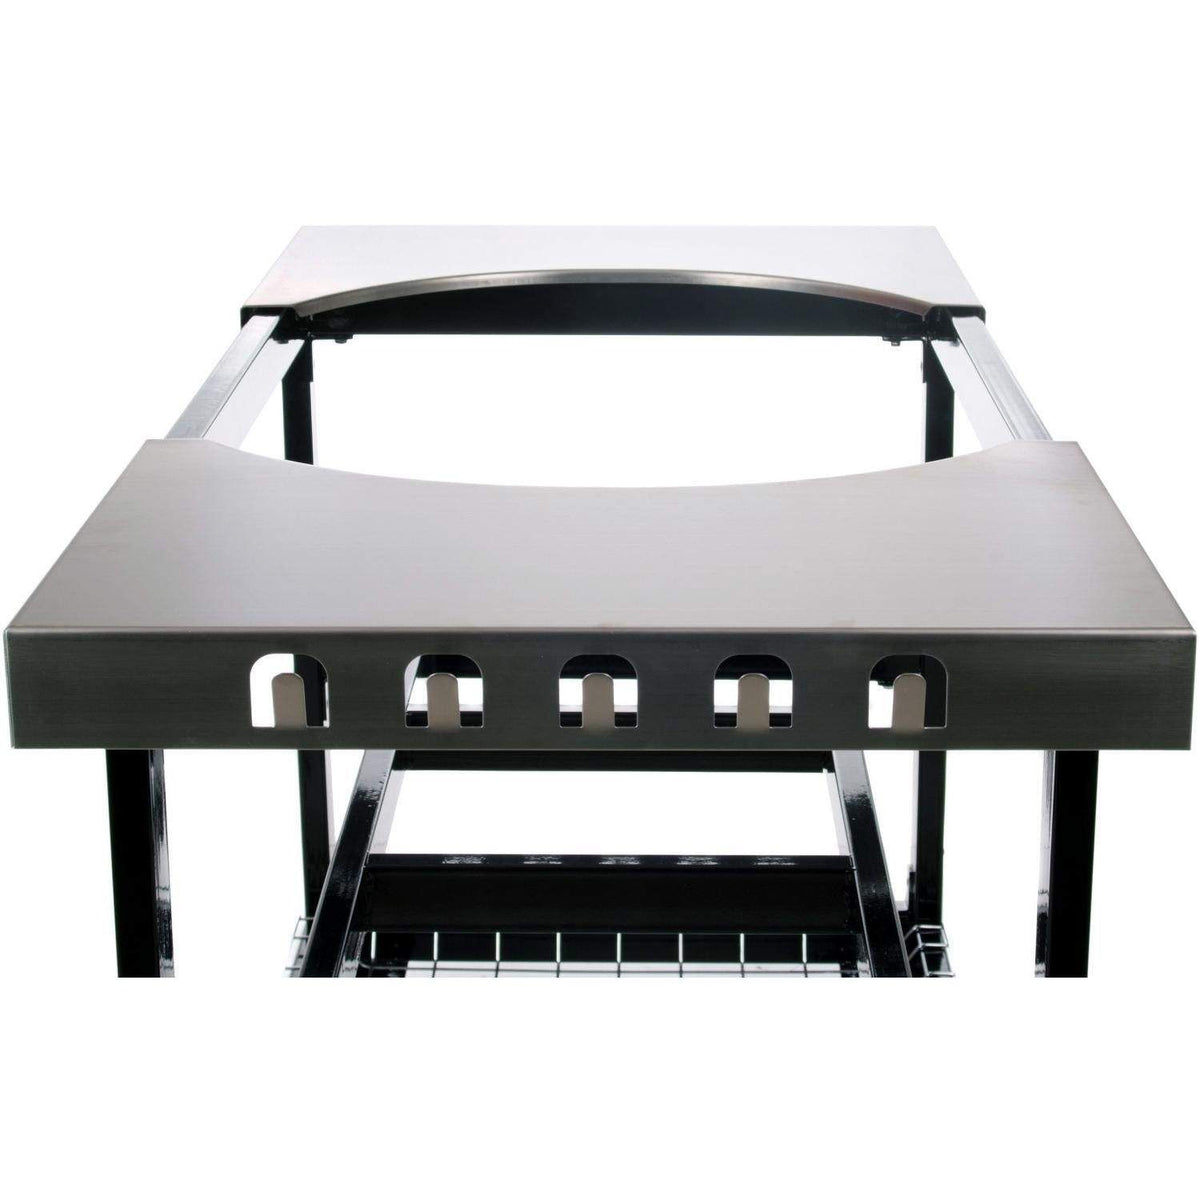 Primo Oval LG 300 and XL 400 Cart with Stainless Steel Side Shelves Shelf Close up